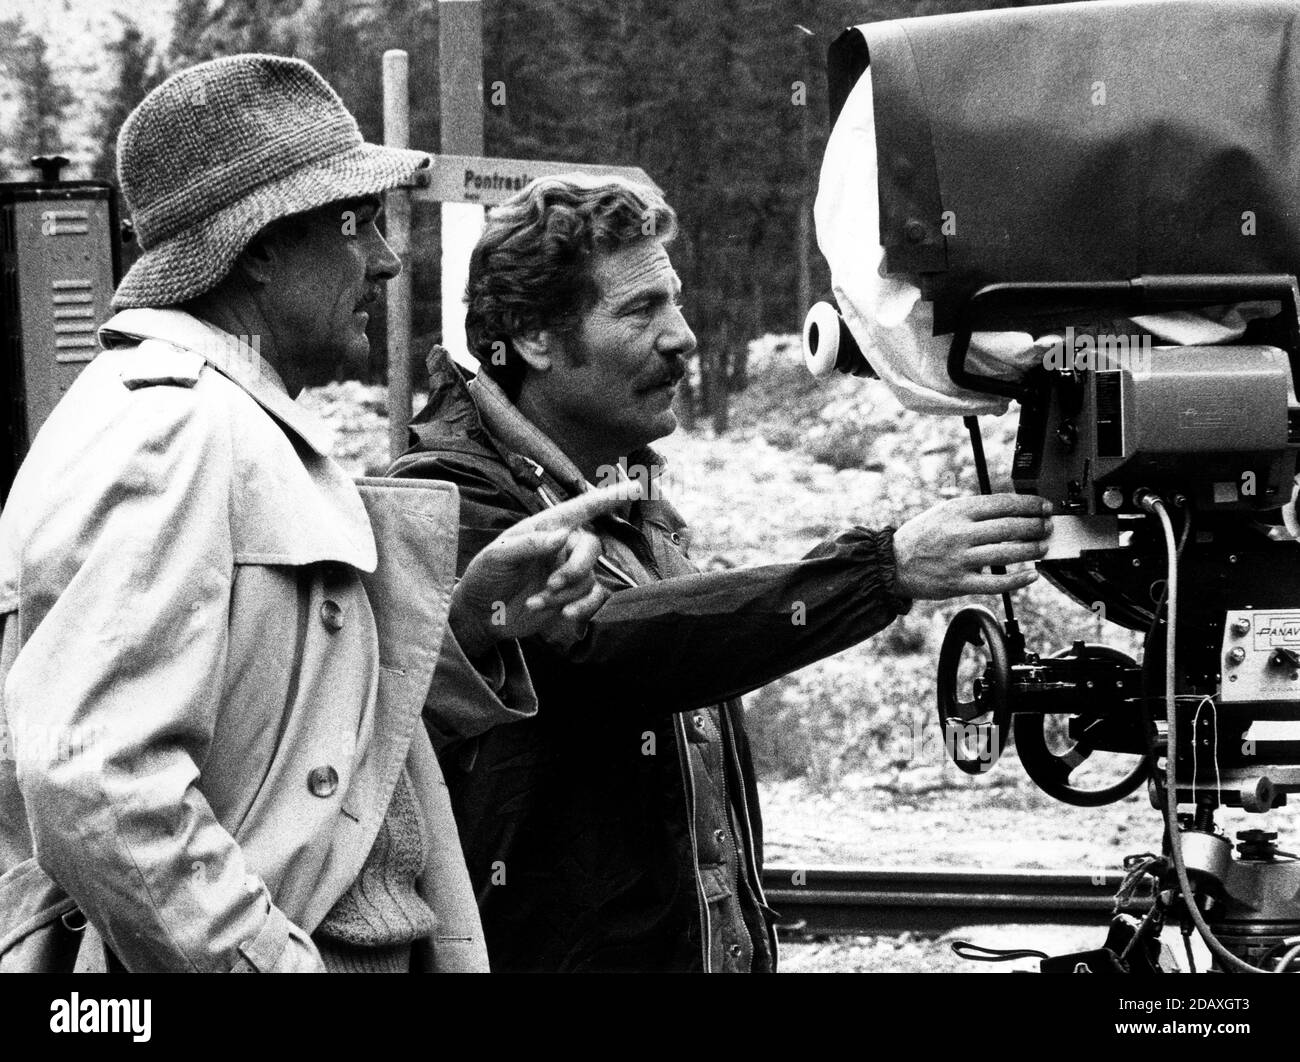 July 2, 1981 - Zurich, Switzerland - Actor SEAN CONNERY, left, discussing with a camera man, has started work on new Zinnermann film 'Five Days One Summer'. This love story will show Connery as an English tourist of 1932 who, having a mountain accident, sees his wife running away with a Swiss mountain guide. 20 million Swiss Francs will be spent for this new movie. (Credit Image: © Keystone Press Agency/Keystone USA via ZUMAPRESS.com) Stock Photo